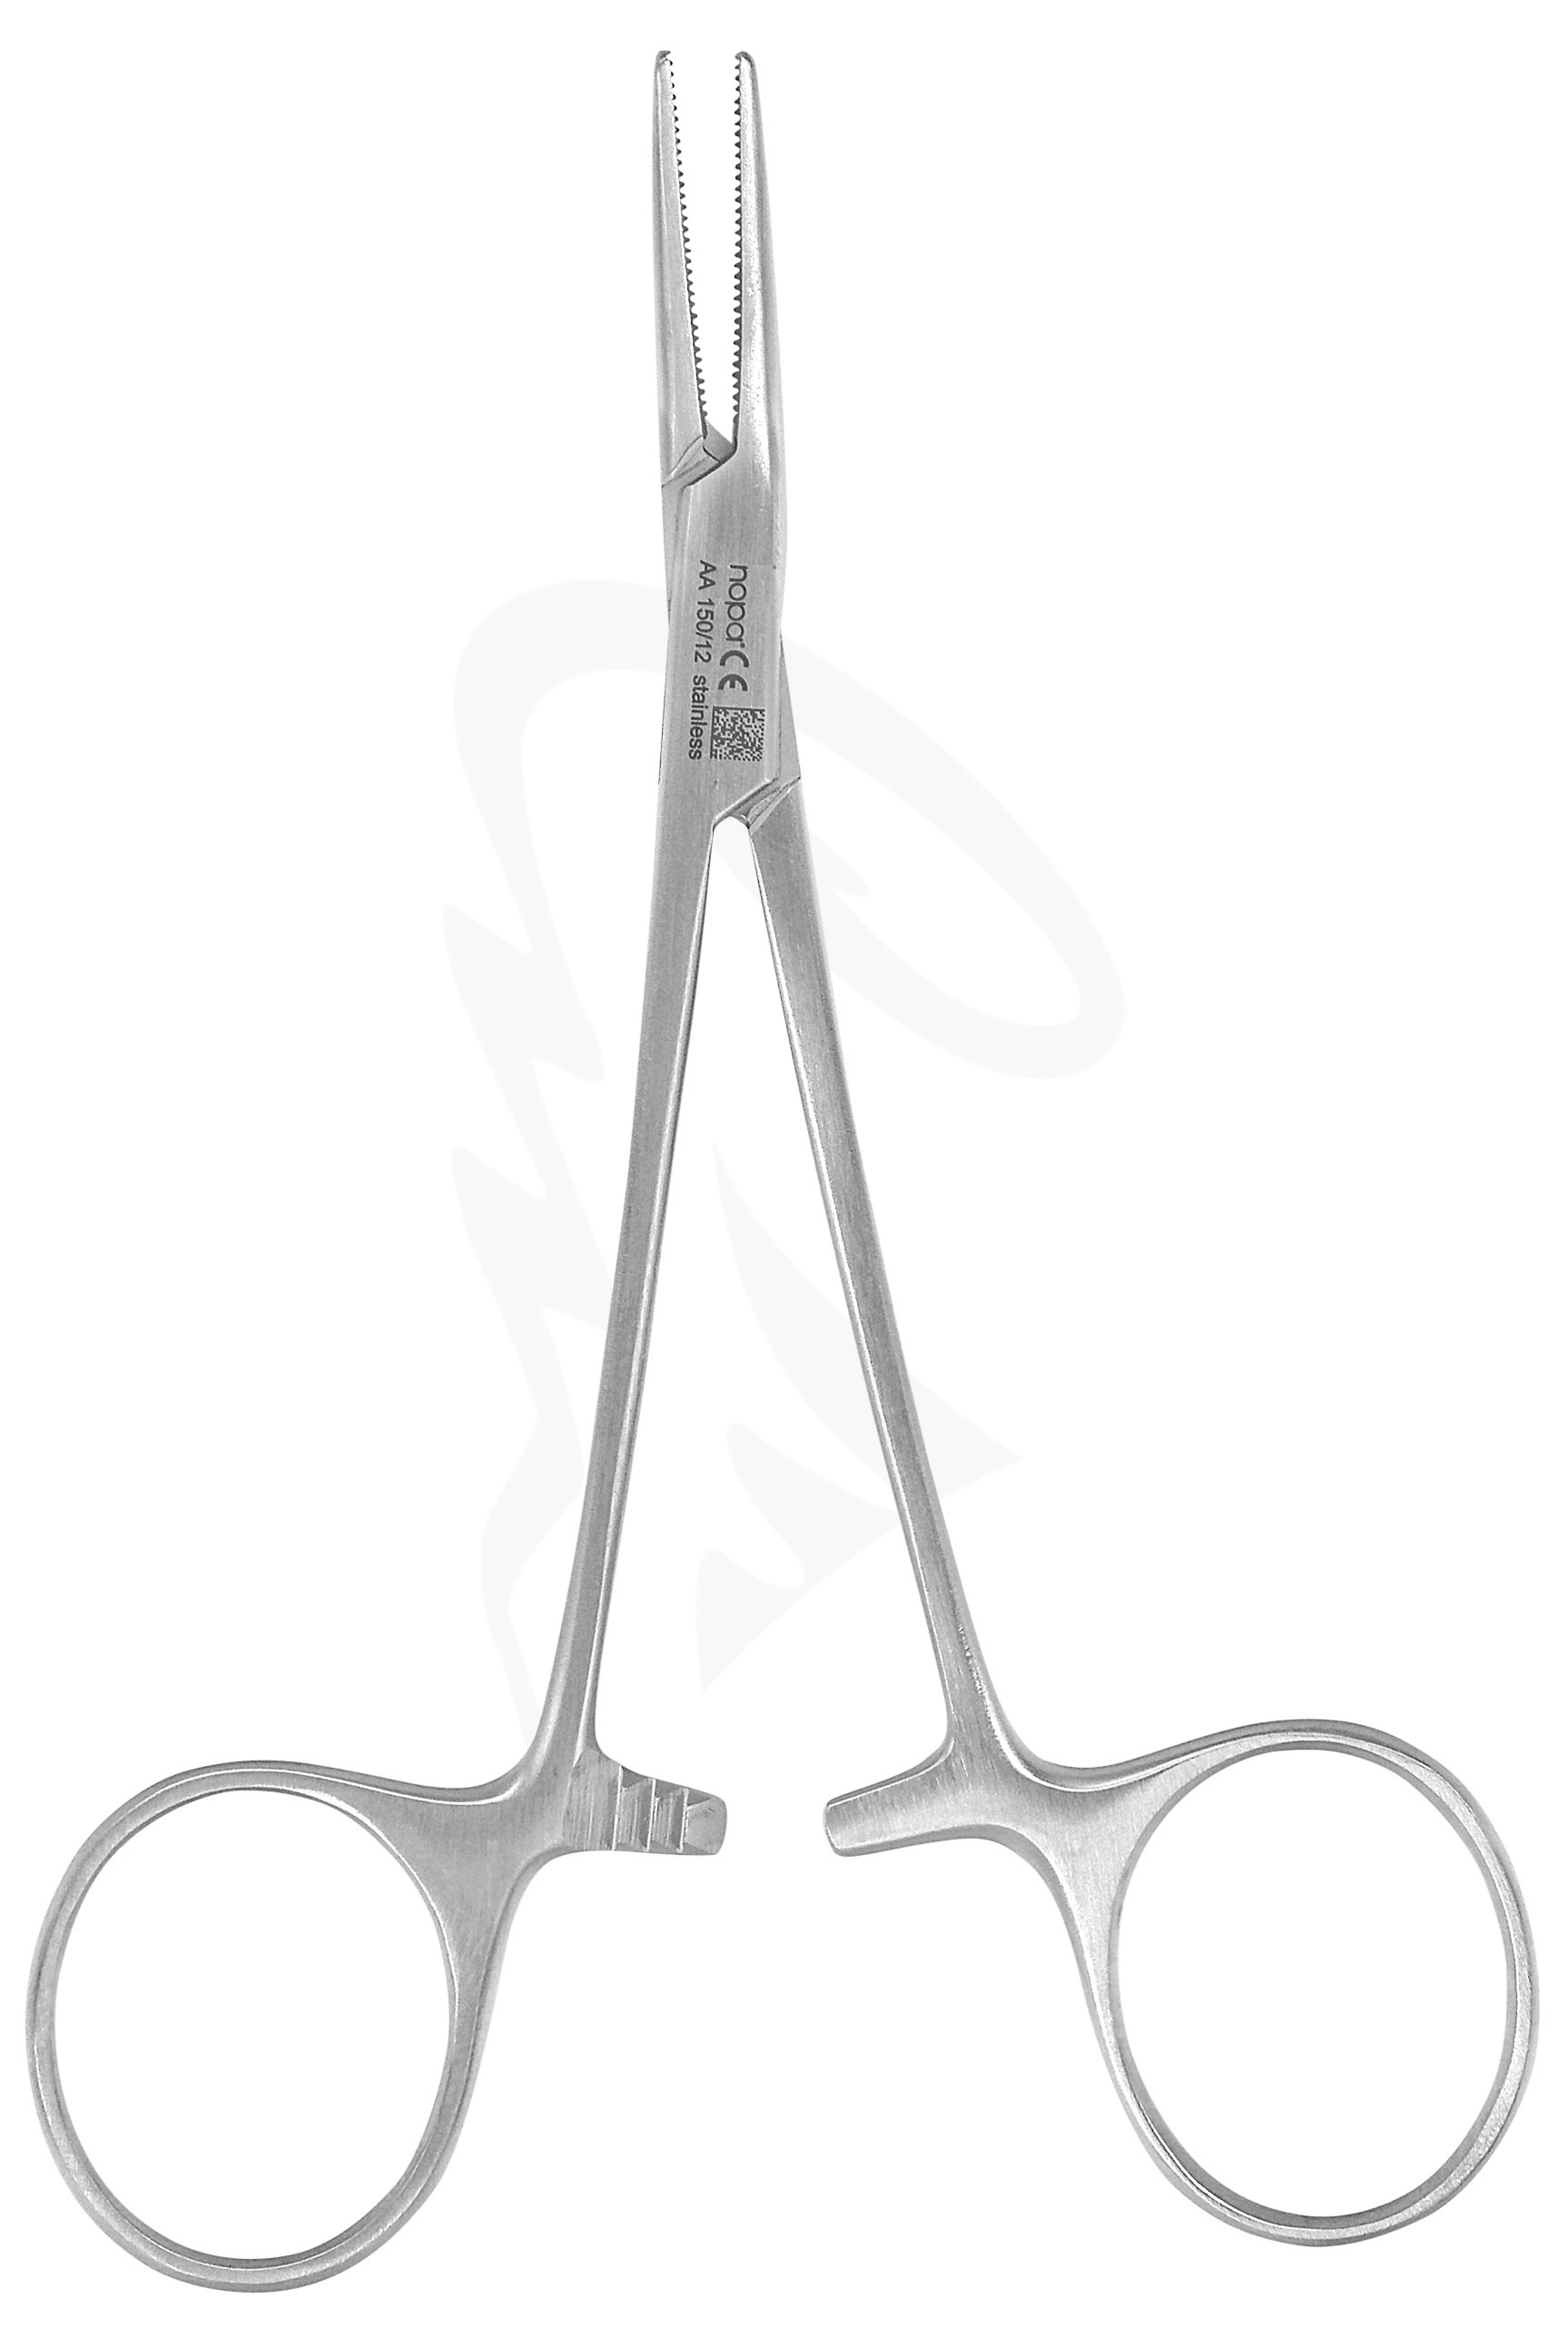 Nopa Halsted-Mosquito Artery Forcep Straight 14cm image 0